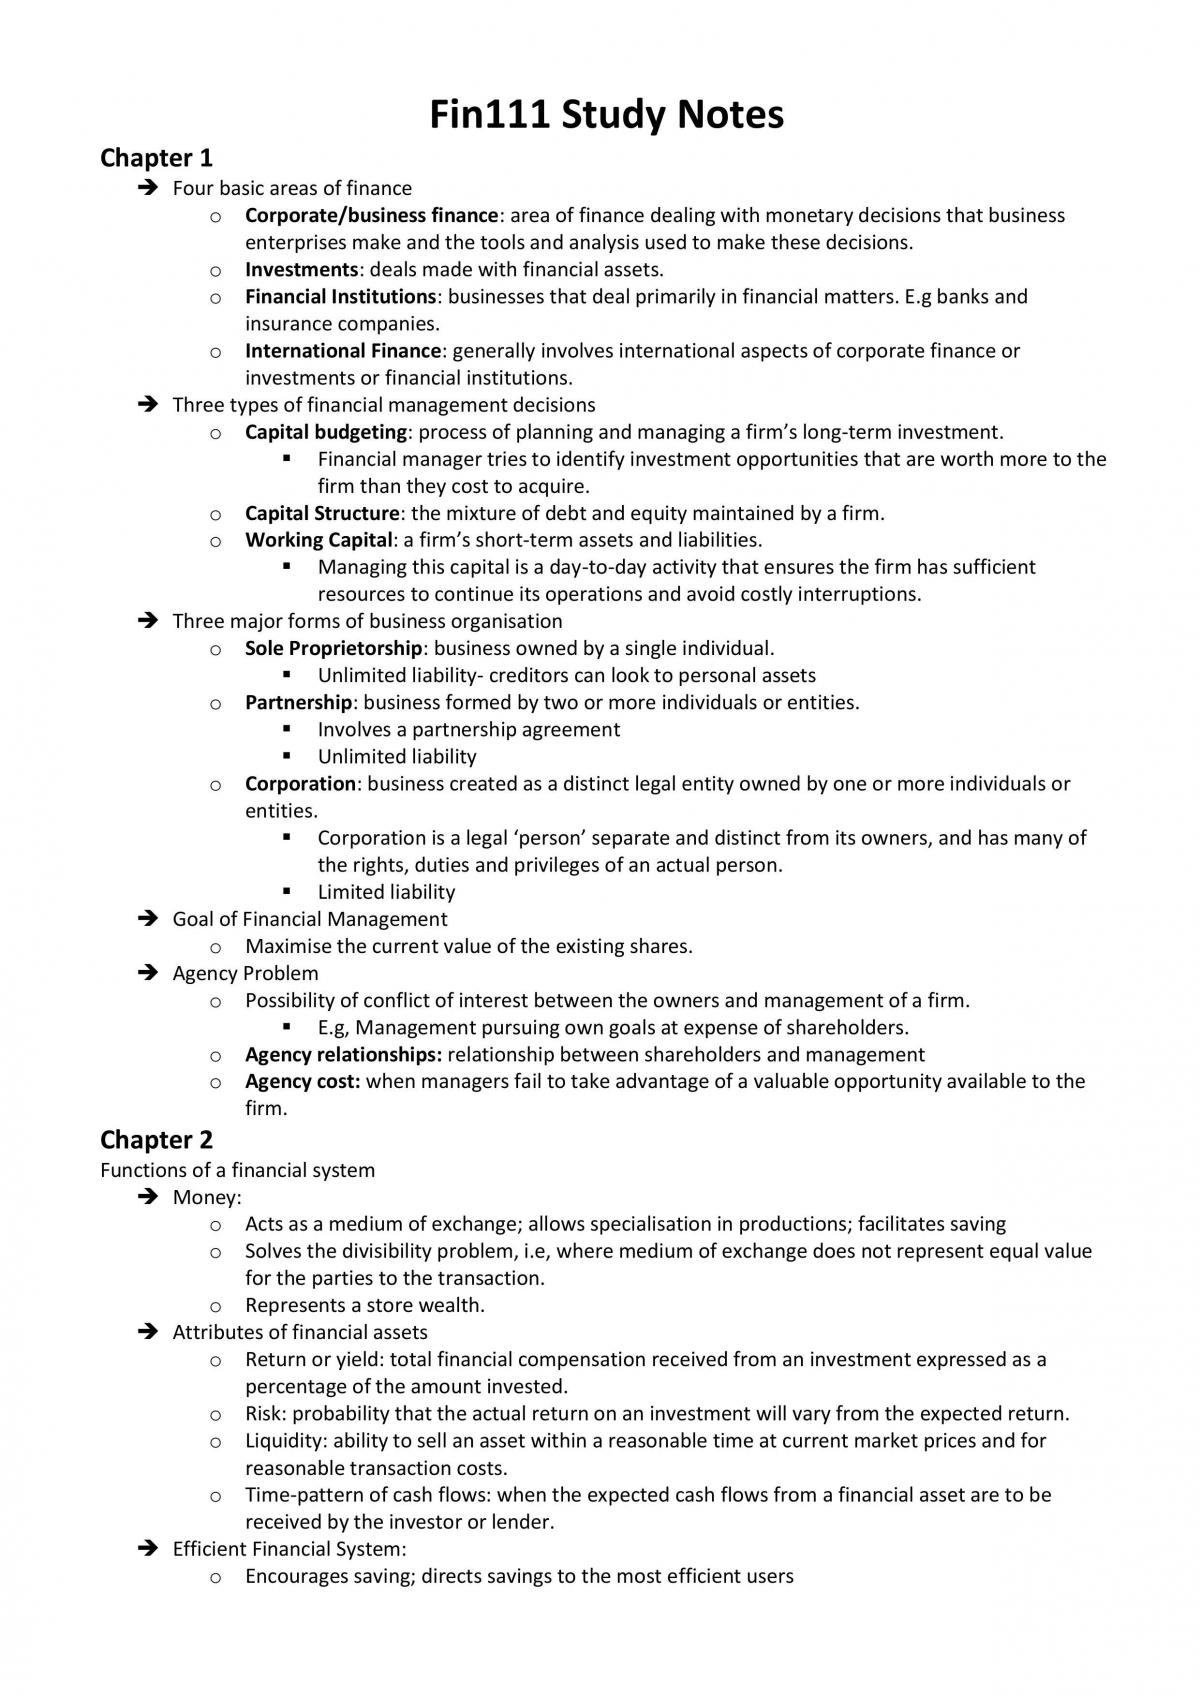 FIN 111 Study notes - Page 1